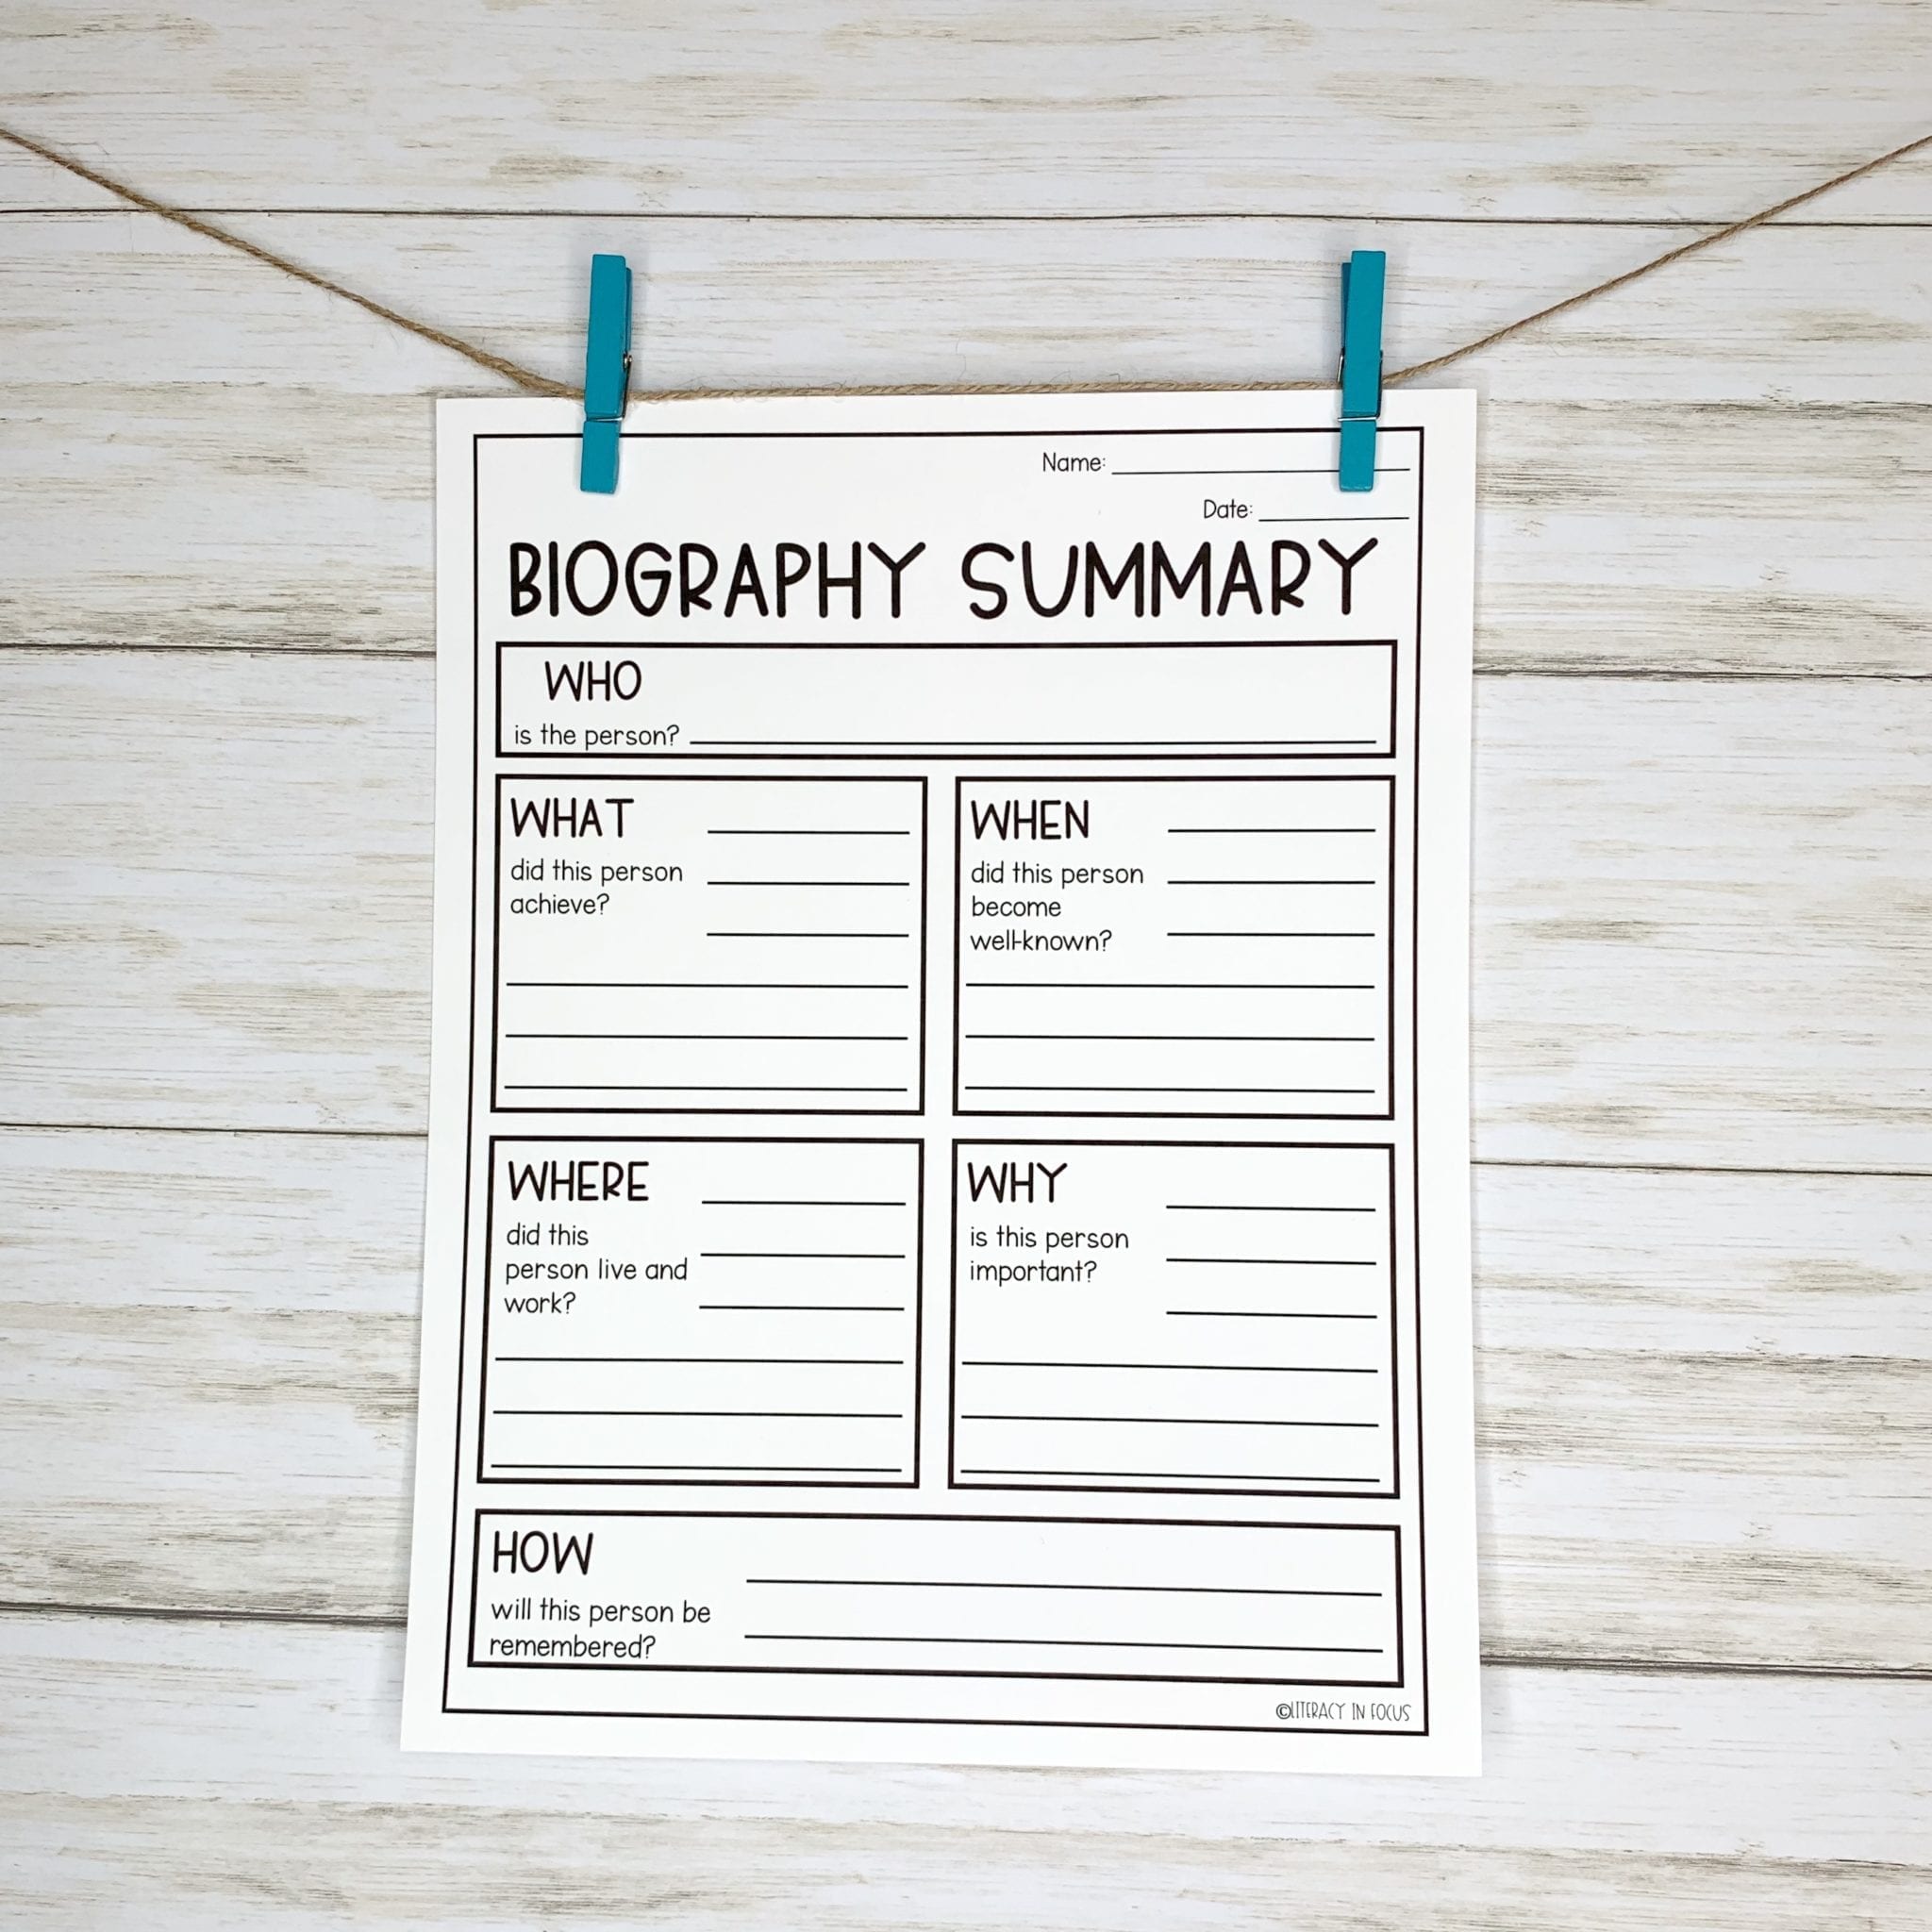 10 Graphic Organizers for Summary Writing - Literacy In Focus